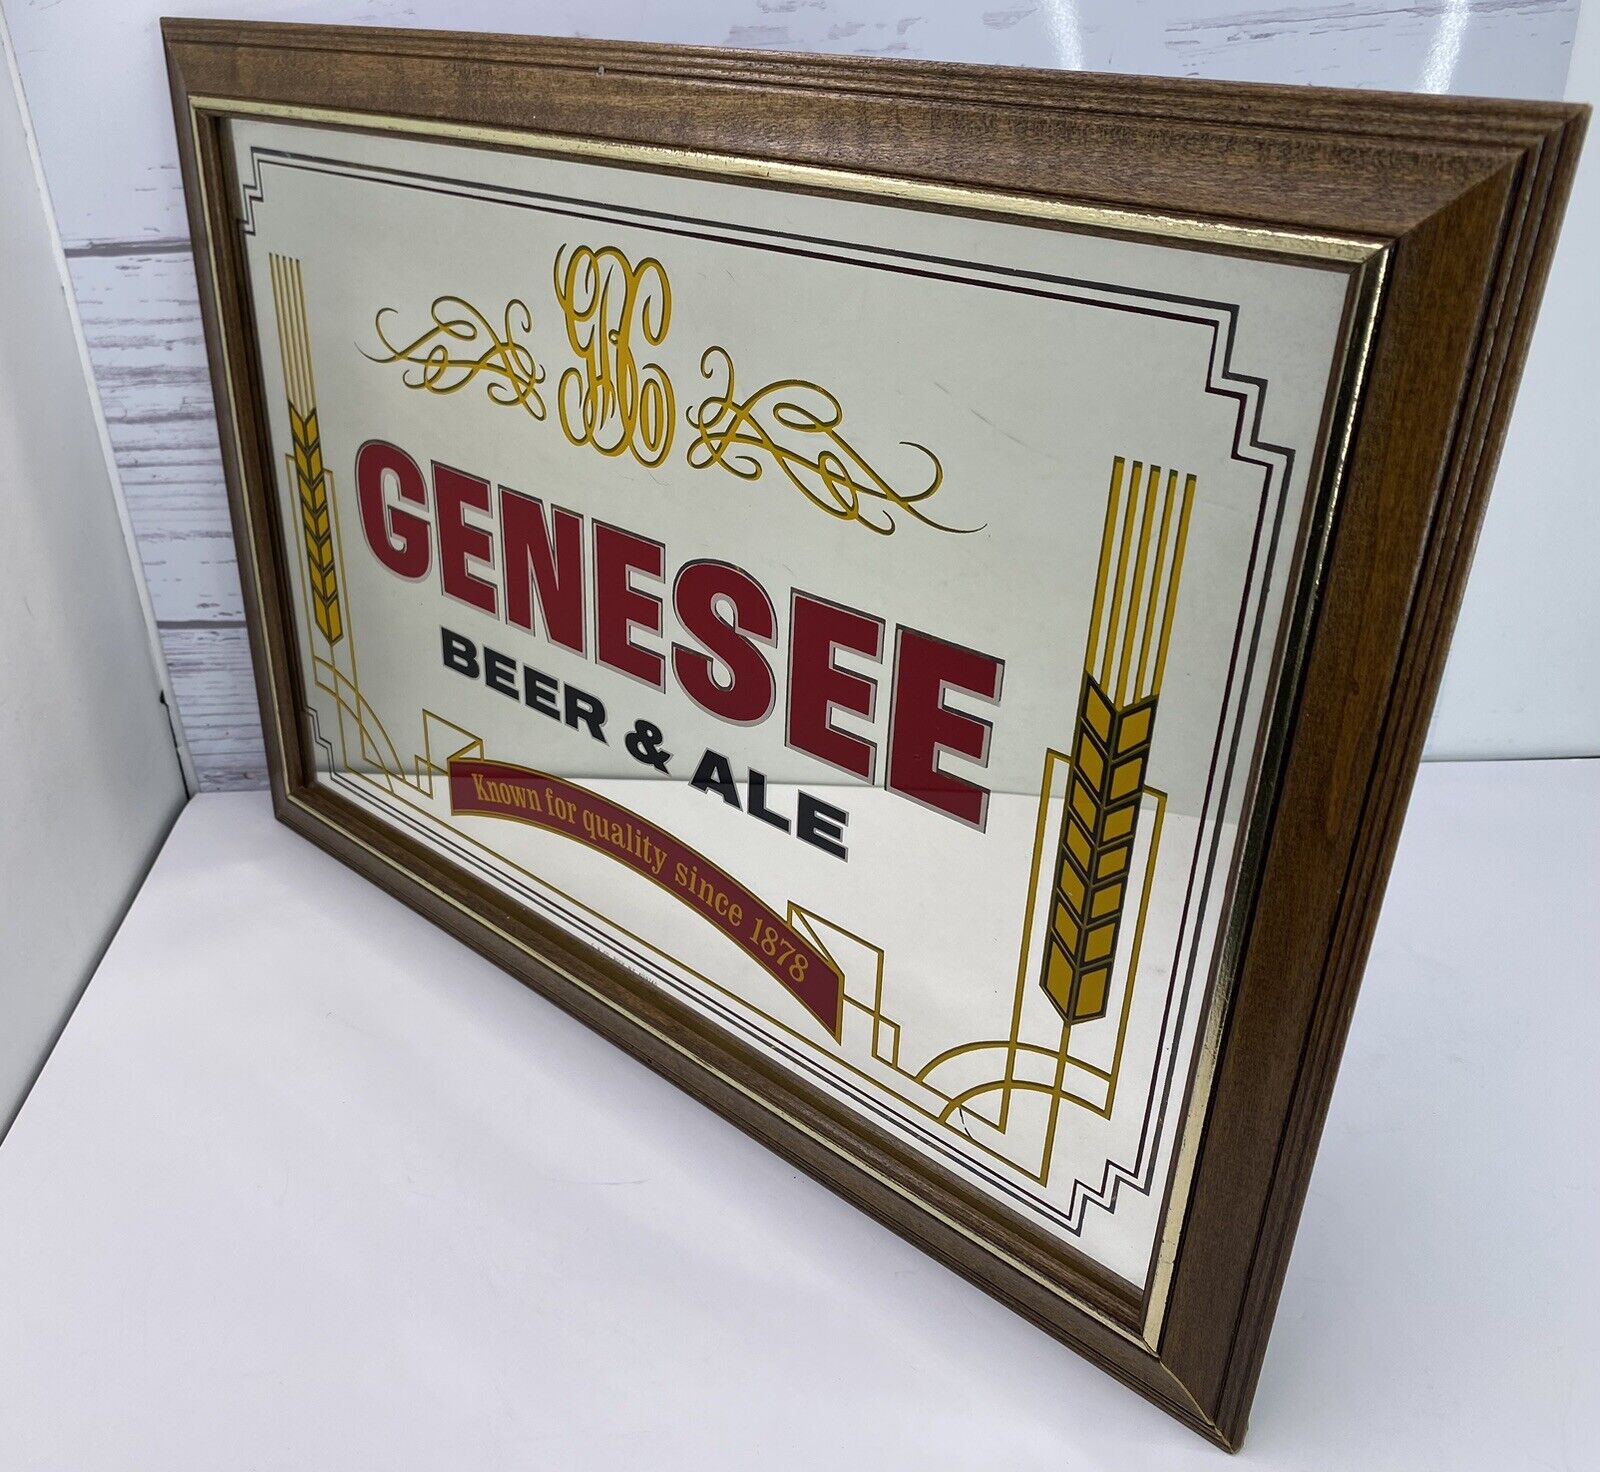 Vintage Genesee Beer & Ale Lighted Mirror Bar Sign Tested Working Man Cave Decor